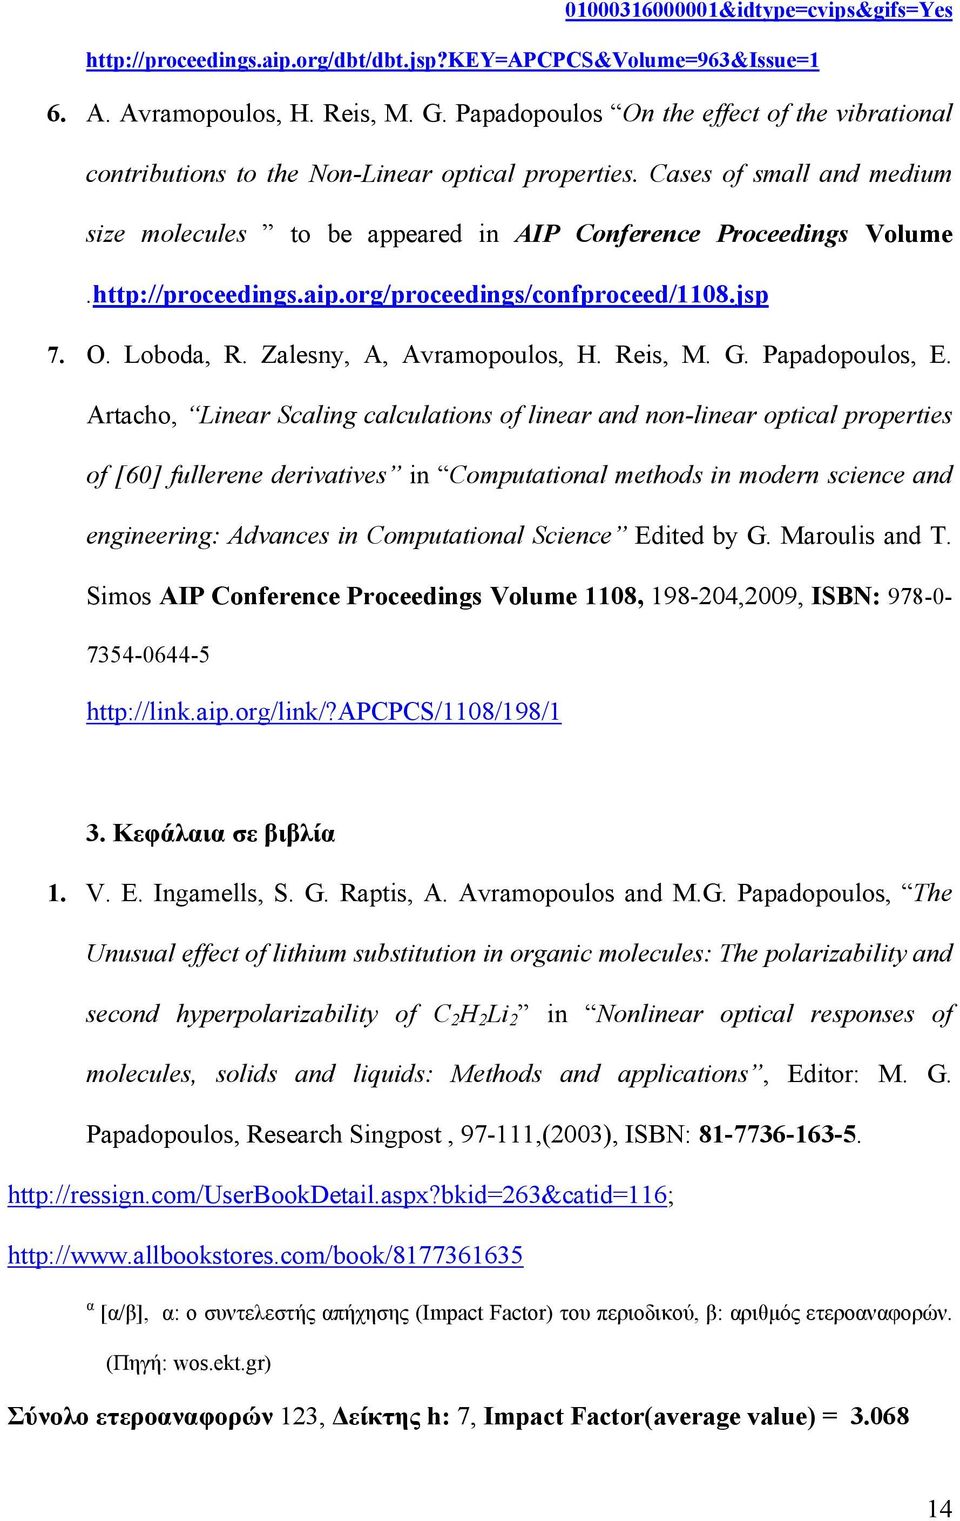 http://proceedings.aip.org/proceedings/confproceed/1108.jsp 7. O. Loboda, R. Zalesny, A, Avramopoulos, H. Reis, M. G. Papadopoulos, E.